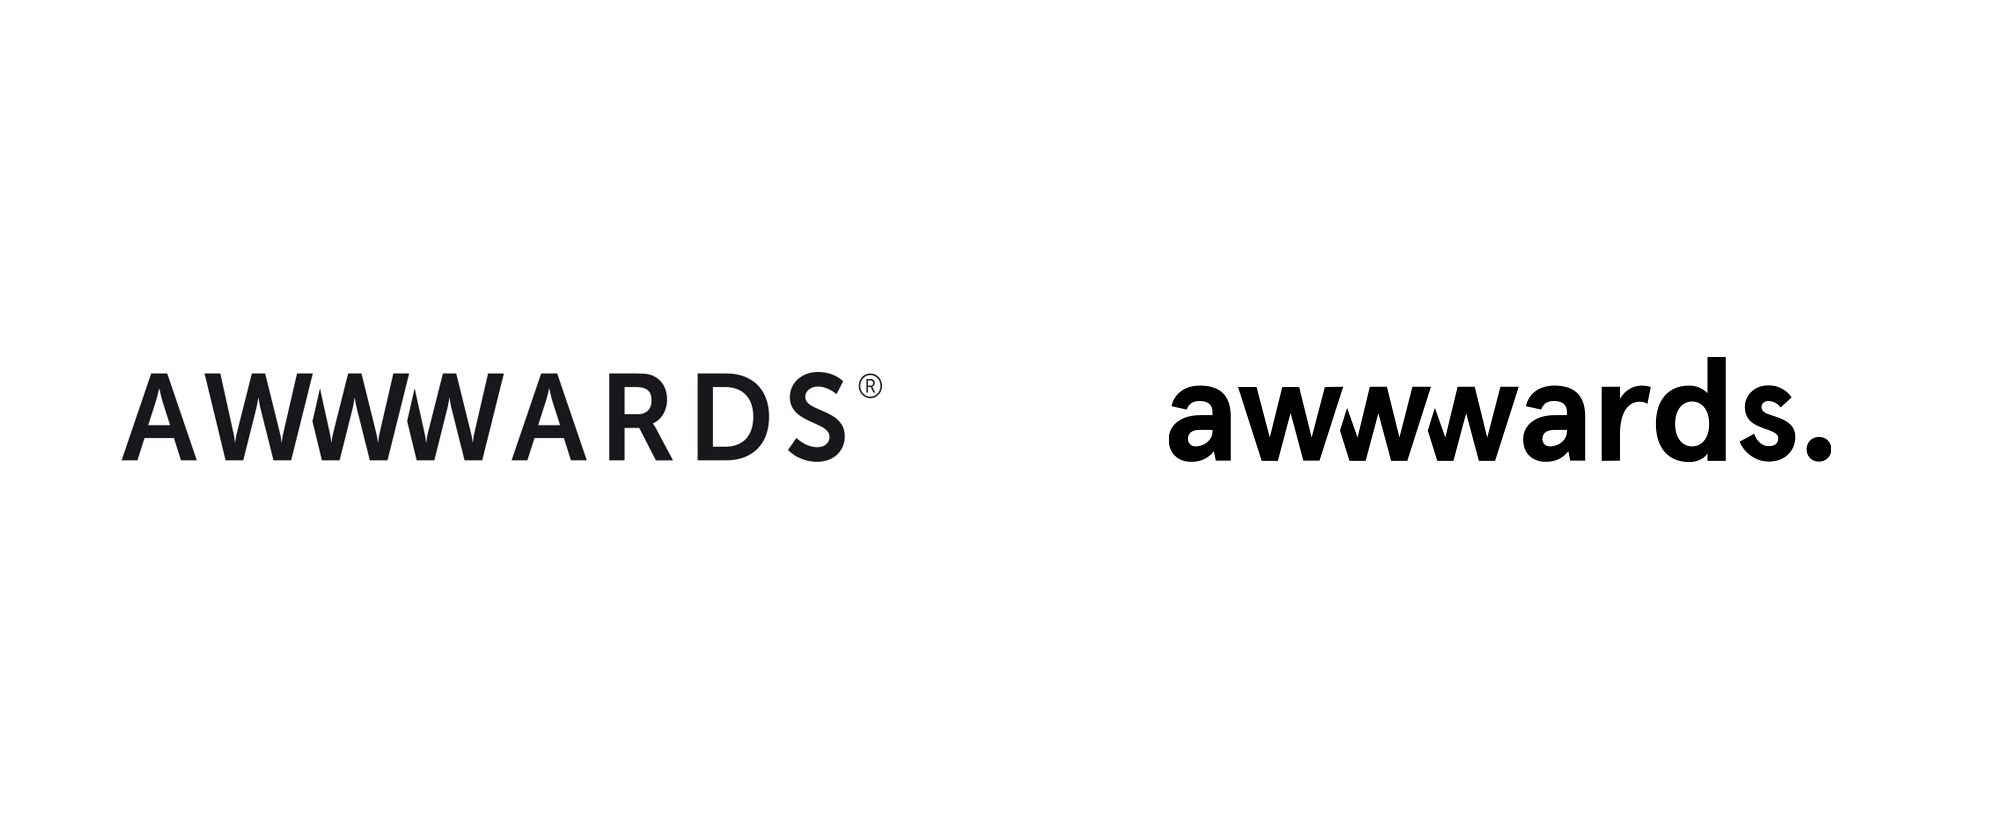 New Logo and Identity for Awwwards by Lesap and In-house